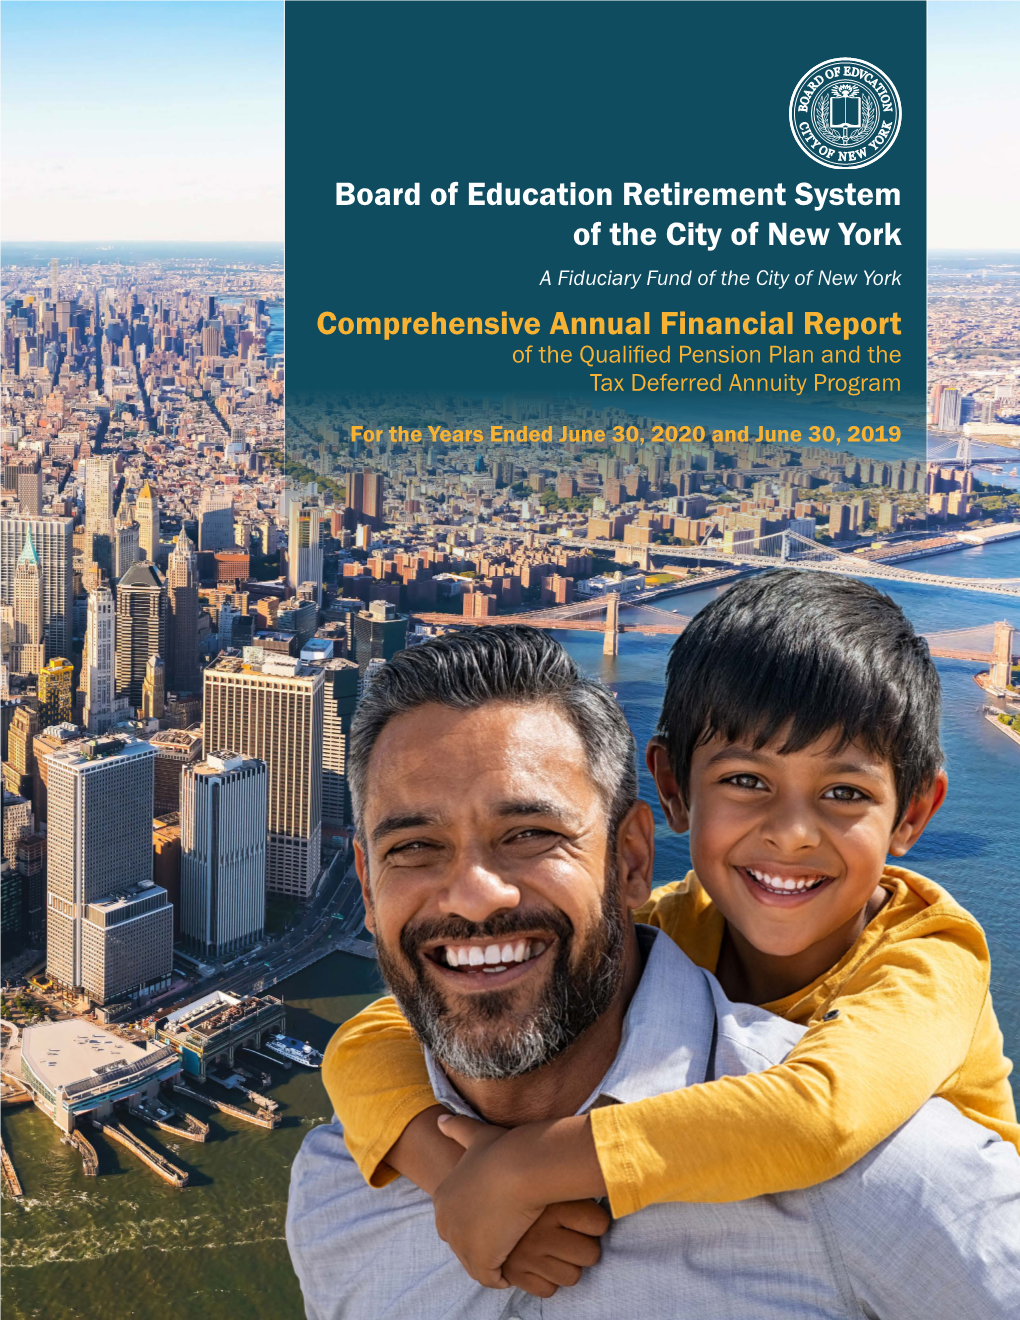 Comprehensive Annual Financial Report of the Qualified Pension Plan and the Tax Deferred Annuity Program